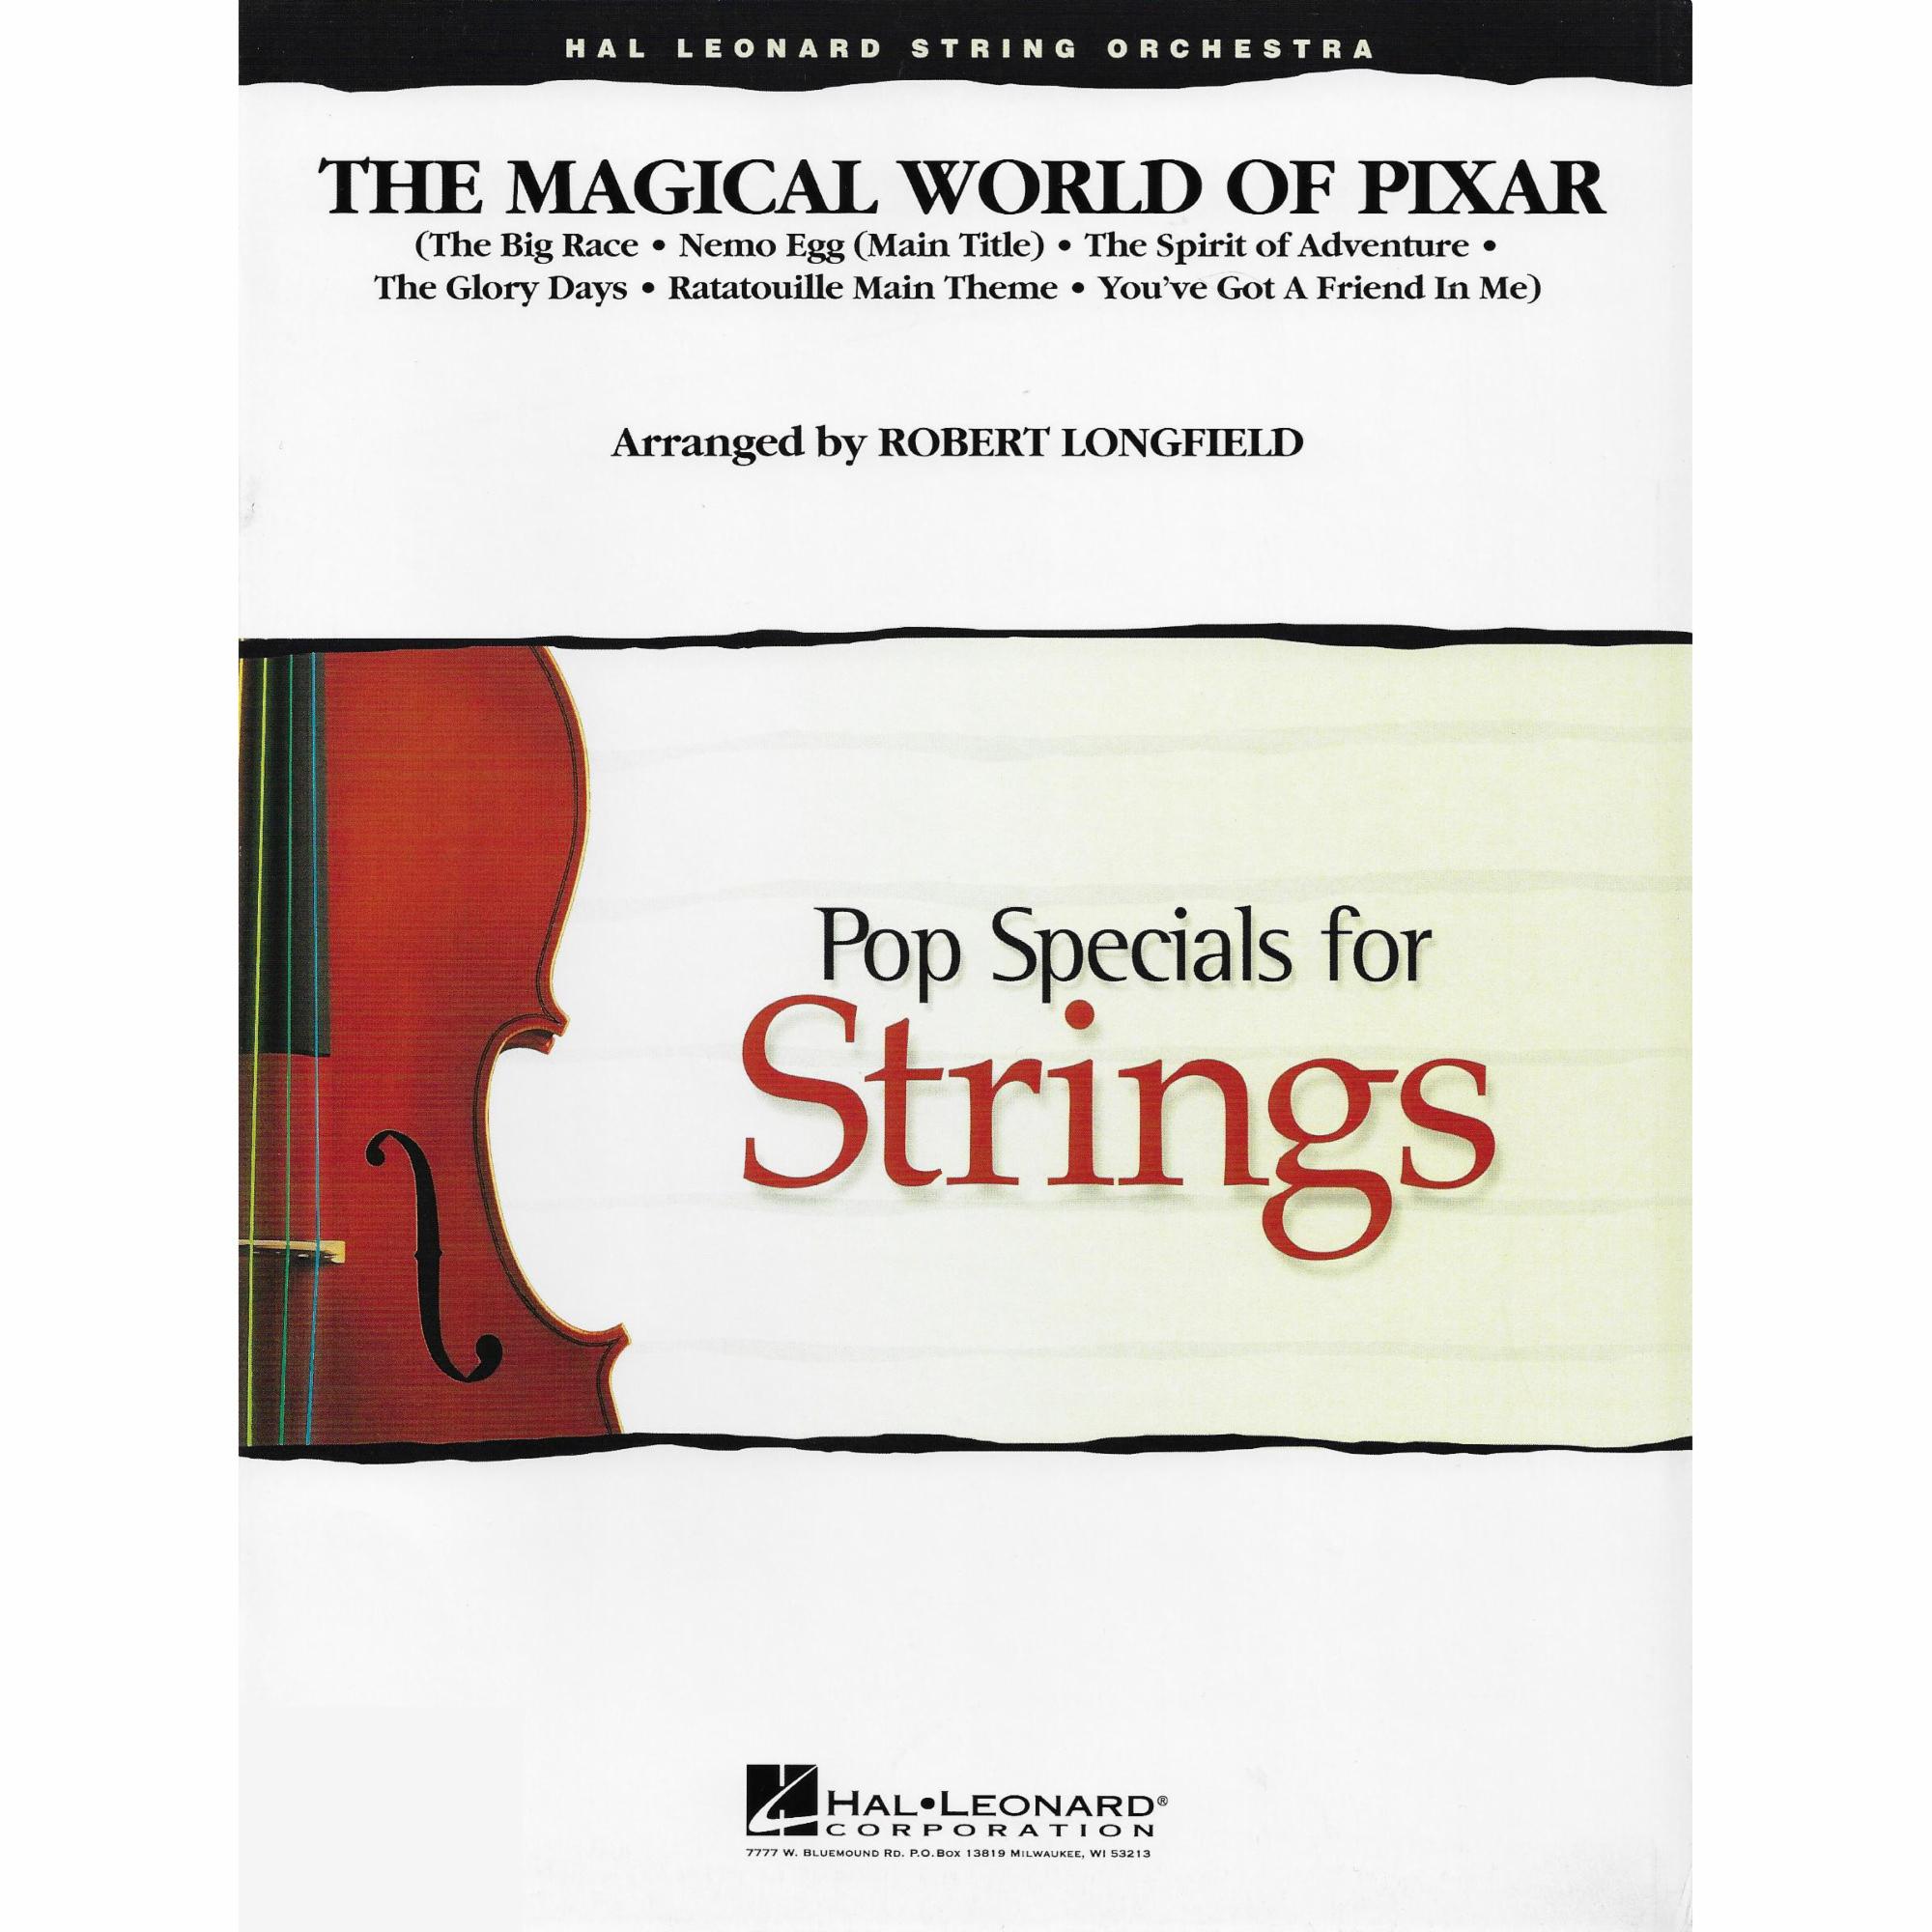 The Magical World of Pixar for String Orchestra